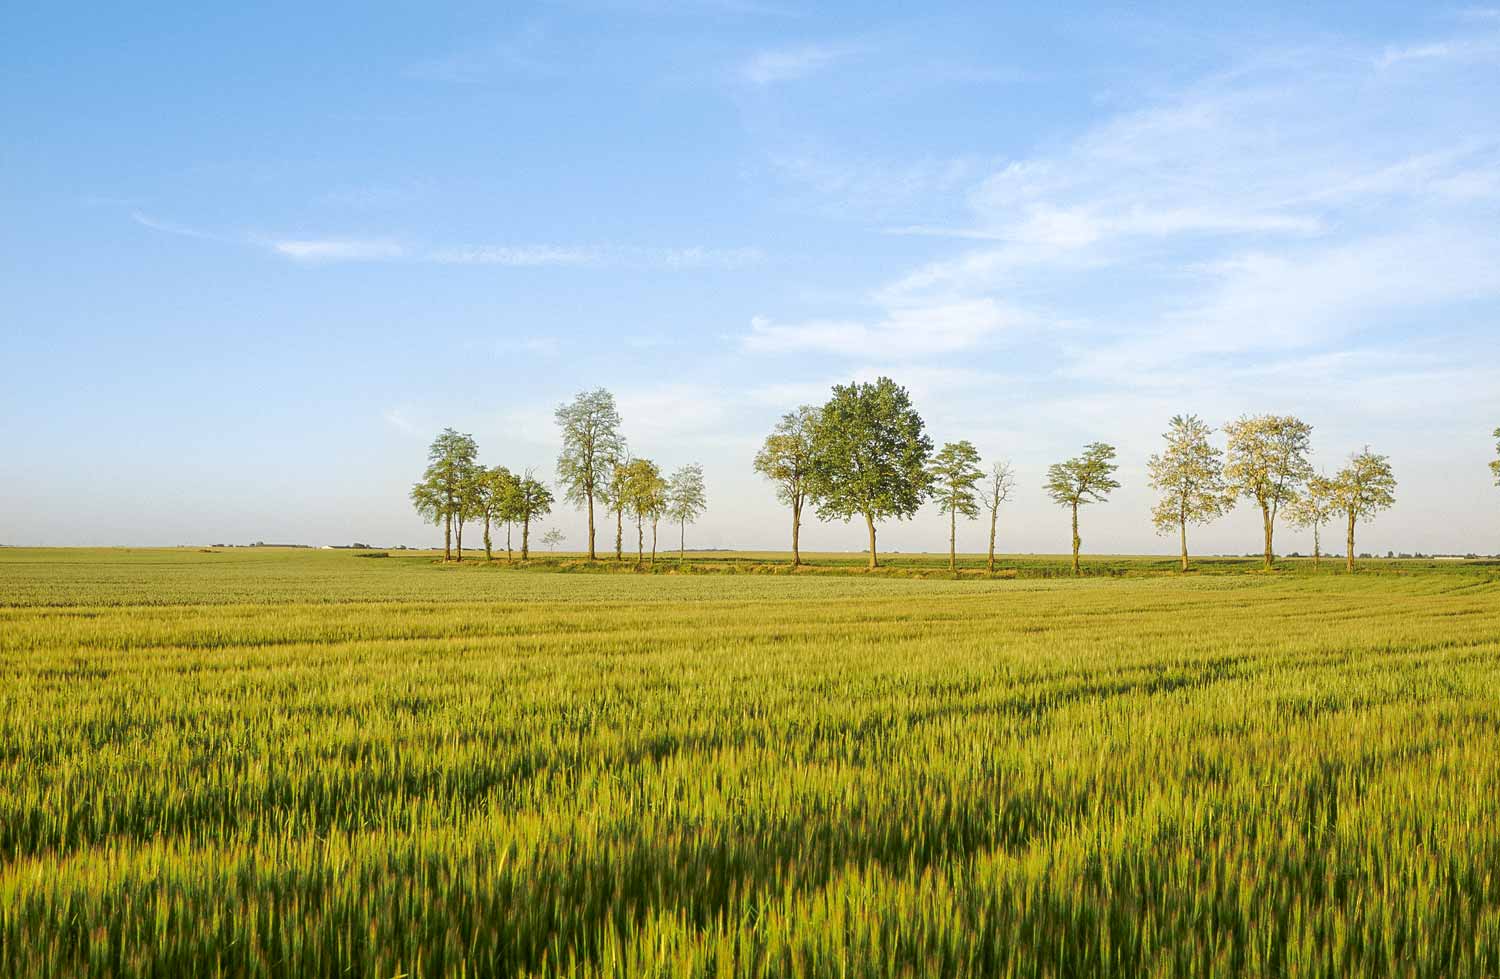 The Beauce wheat field with Atraps trees in the Loiret